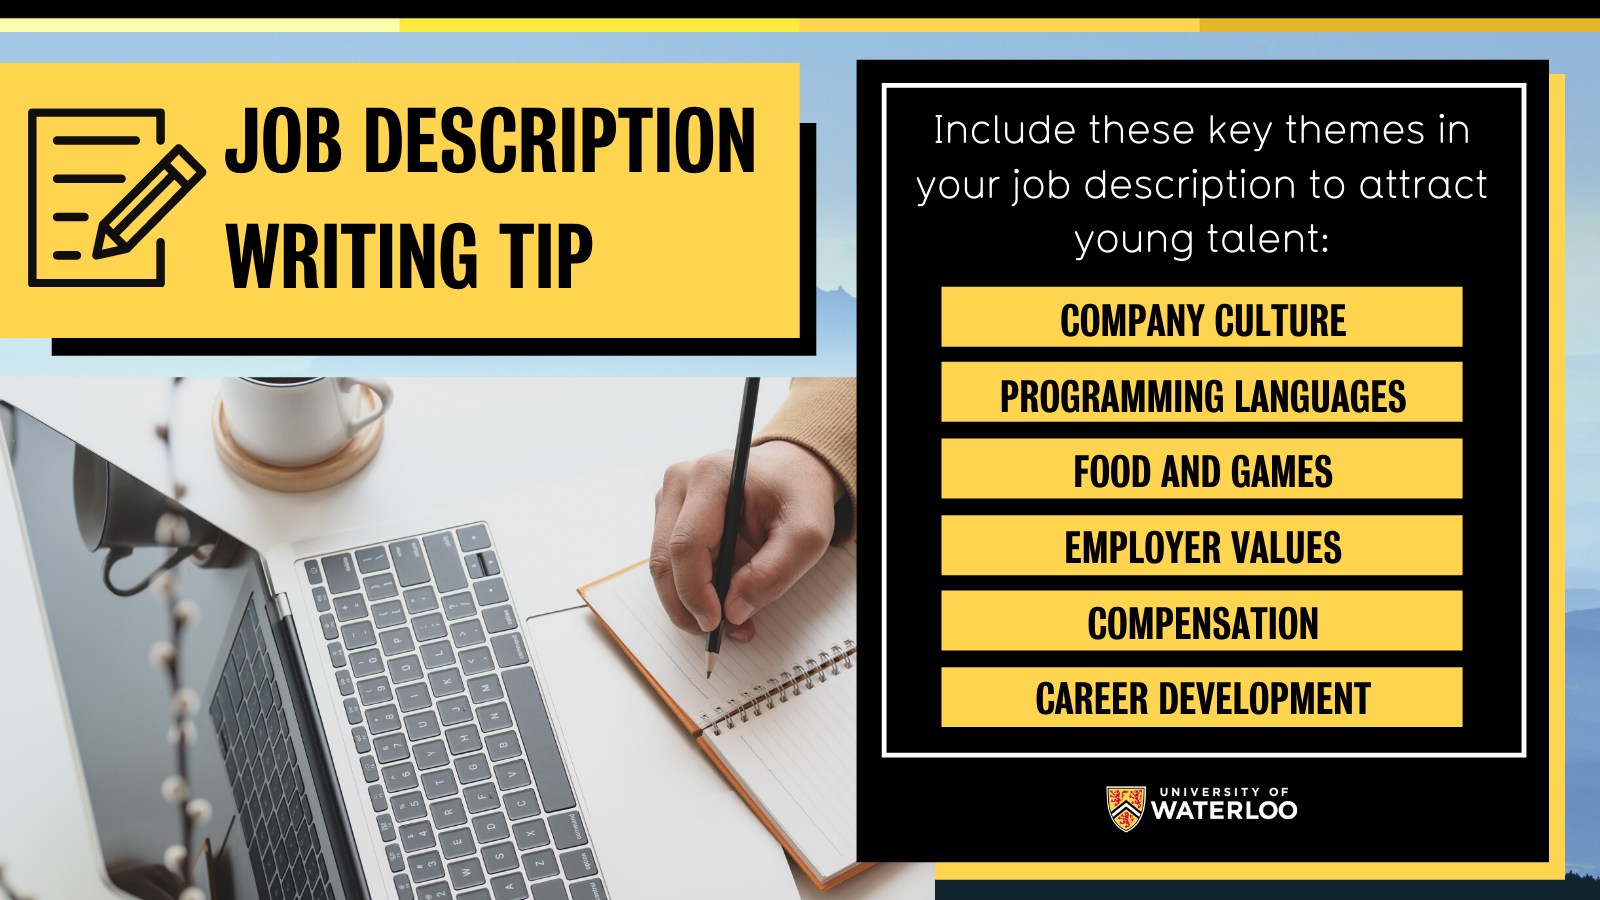  1) company culture, 2) programming language, 3) food and games, 4) employer values, 5) compensation, and 6) opportunities for career development.